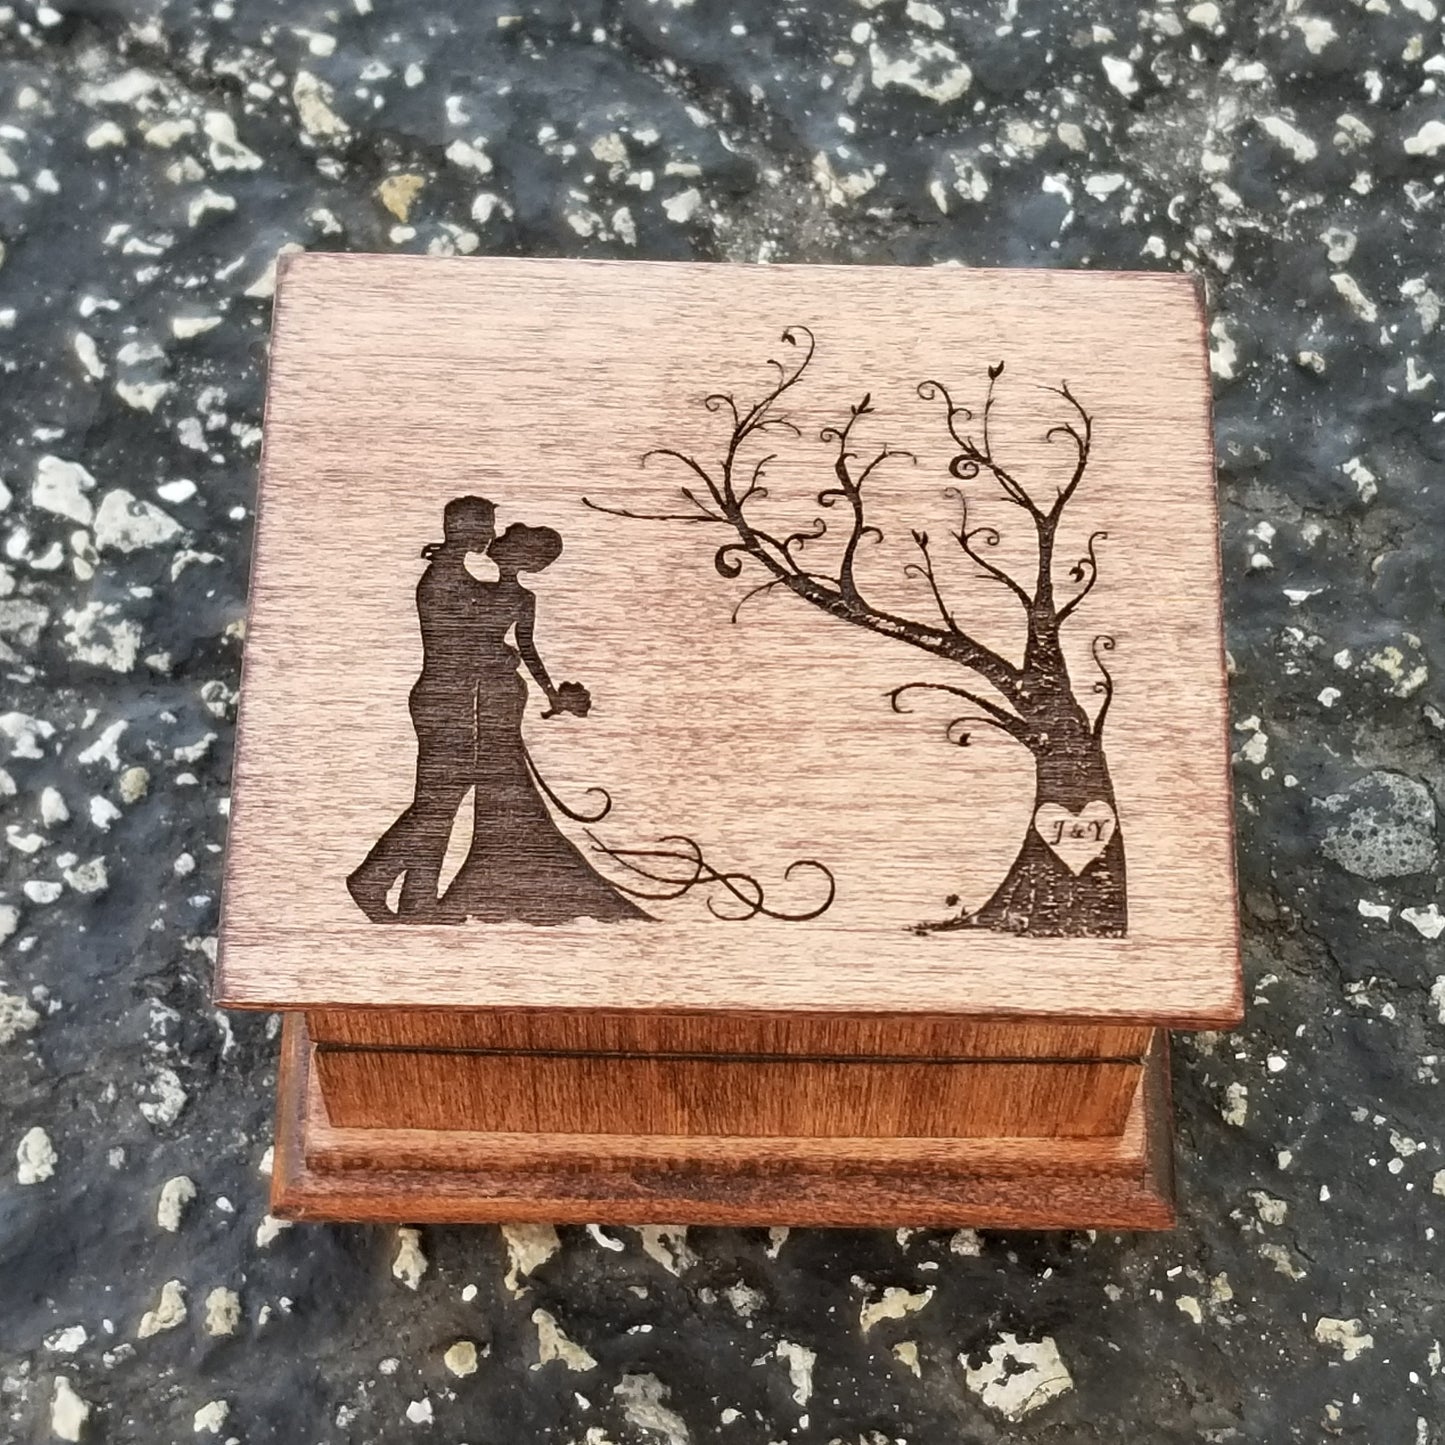 Wedding Music box with couple and tree image with heart carved on top